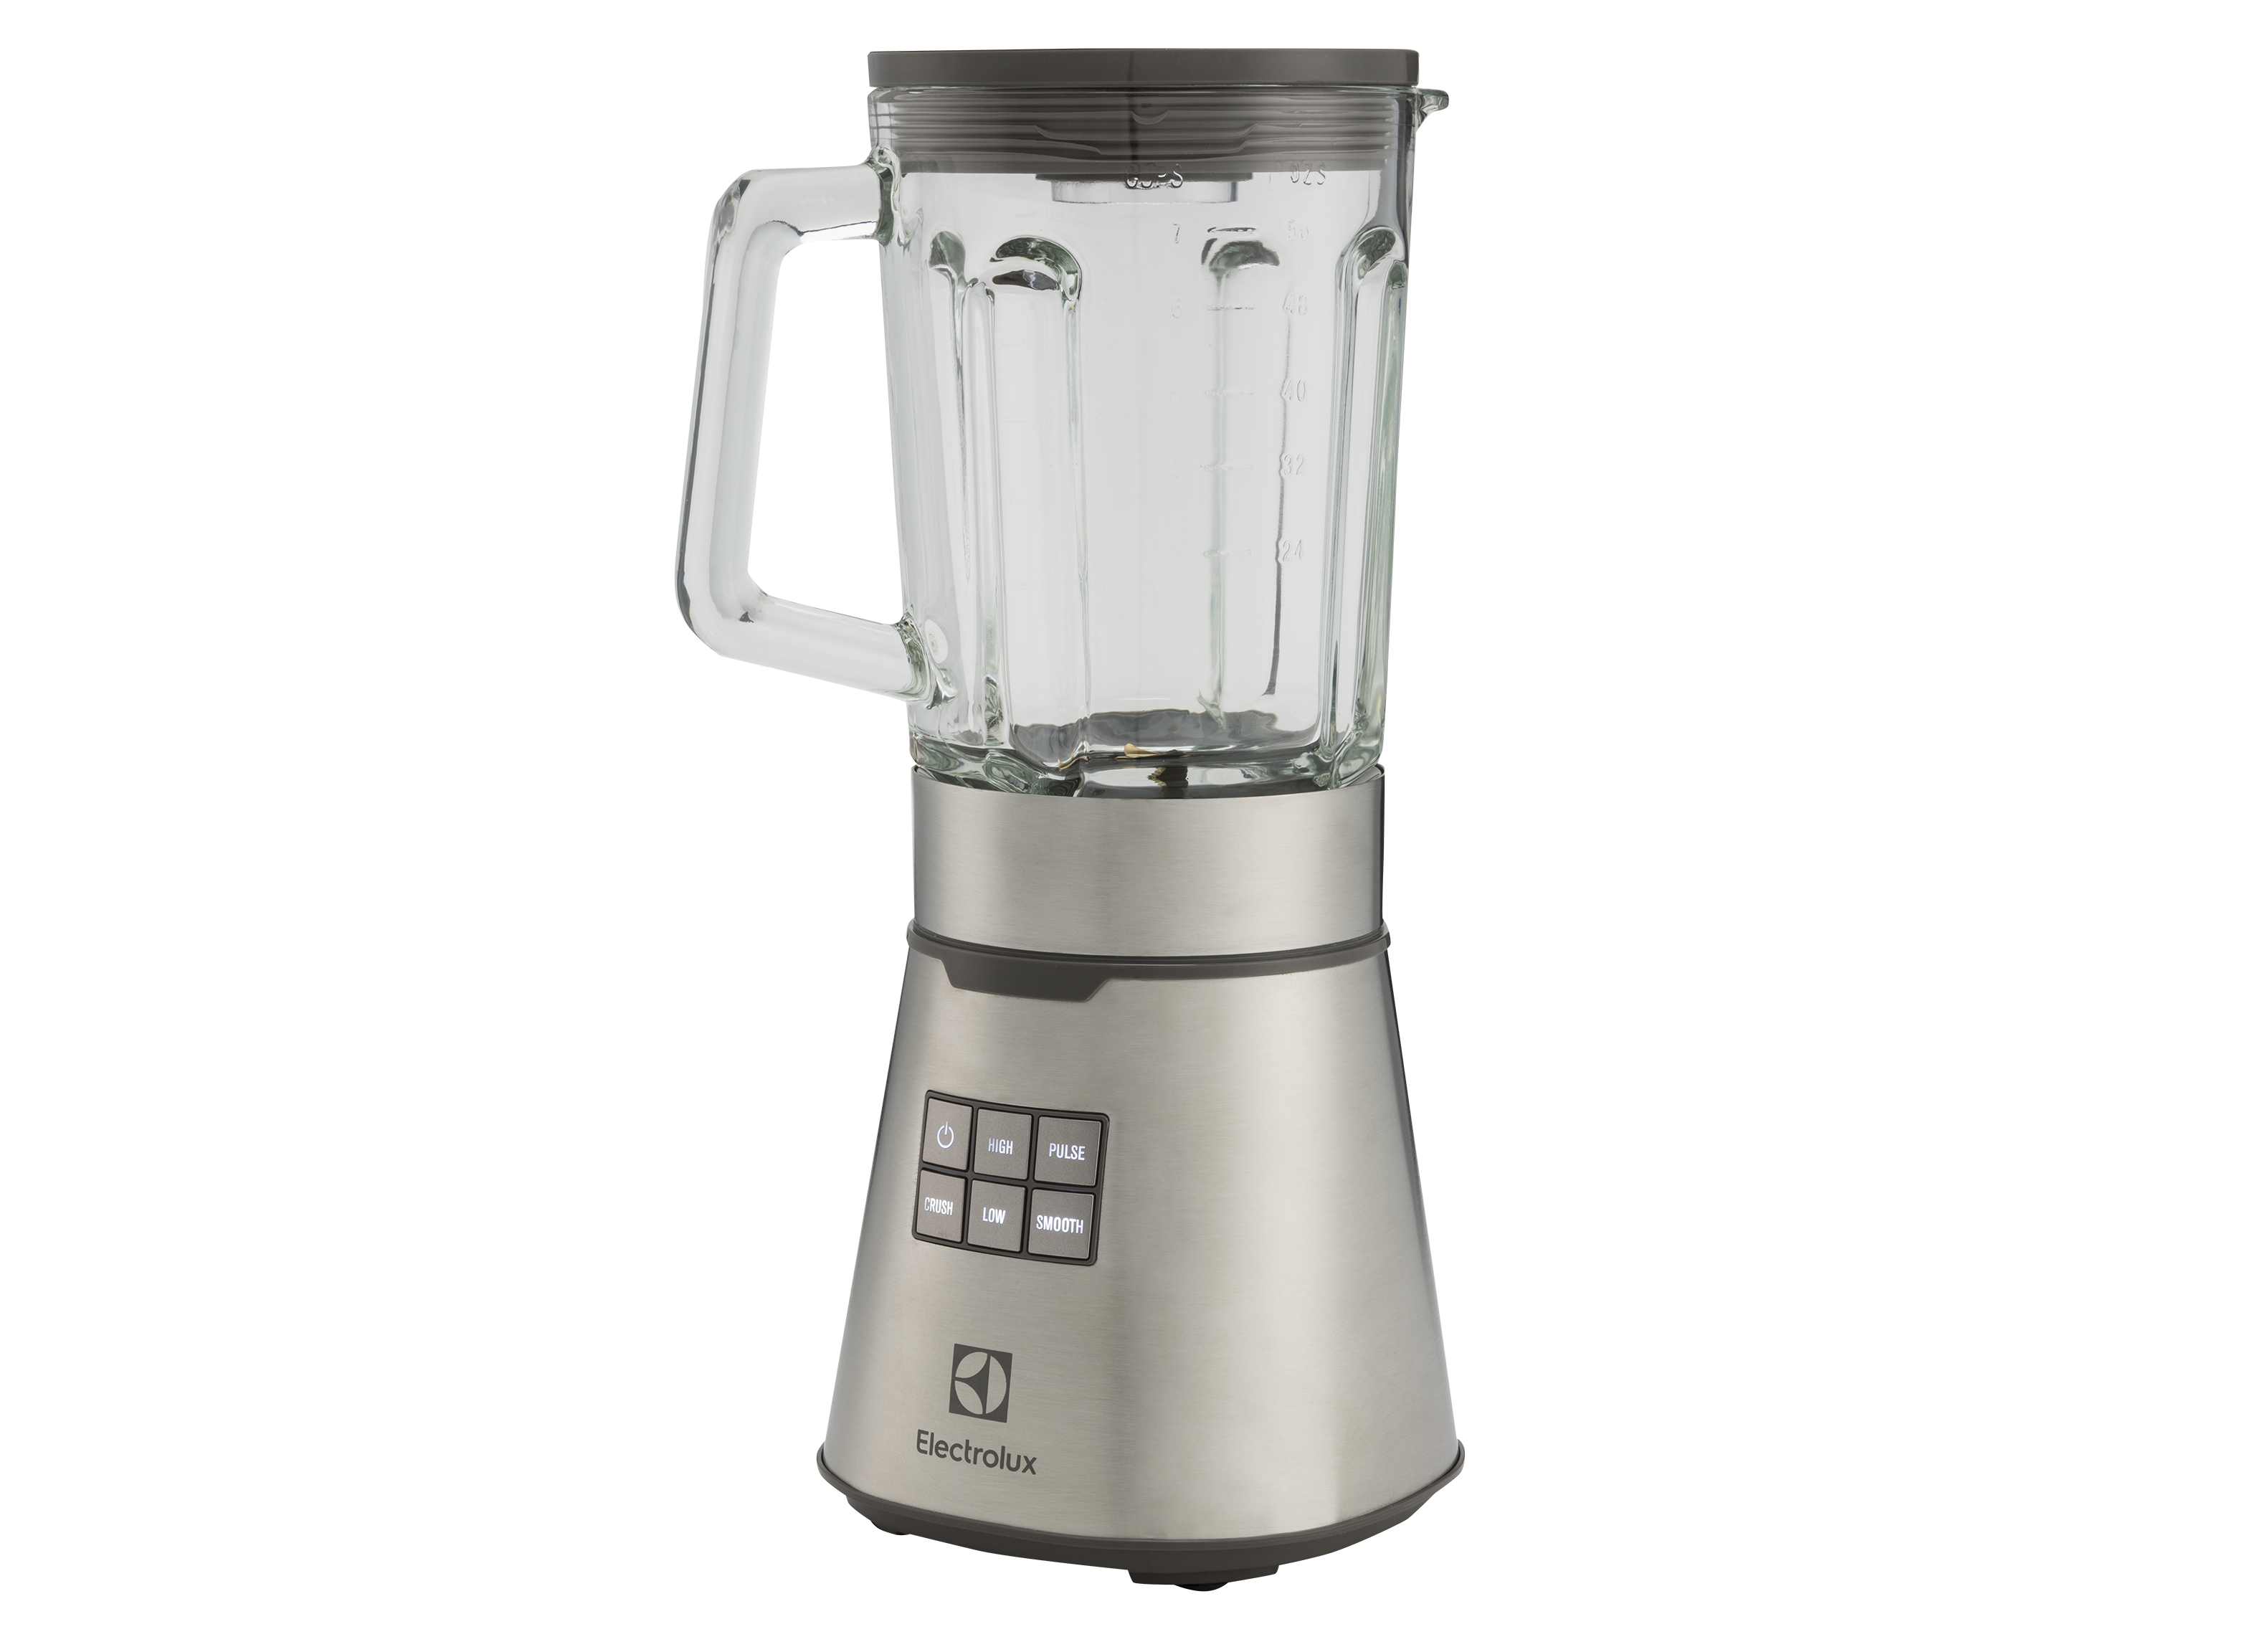 Expressionist ELJB56B8PS Blender Review - Consumer Reports